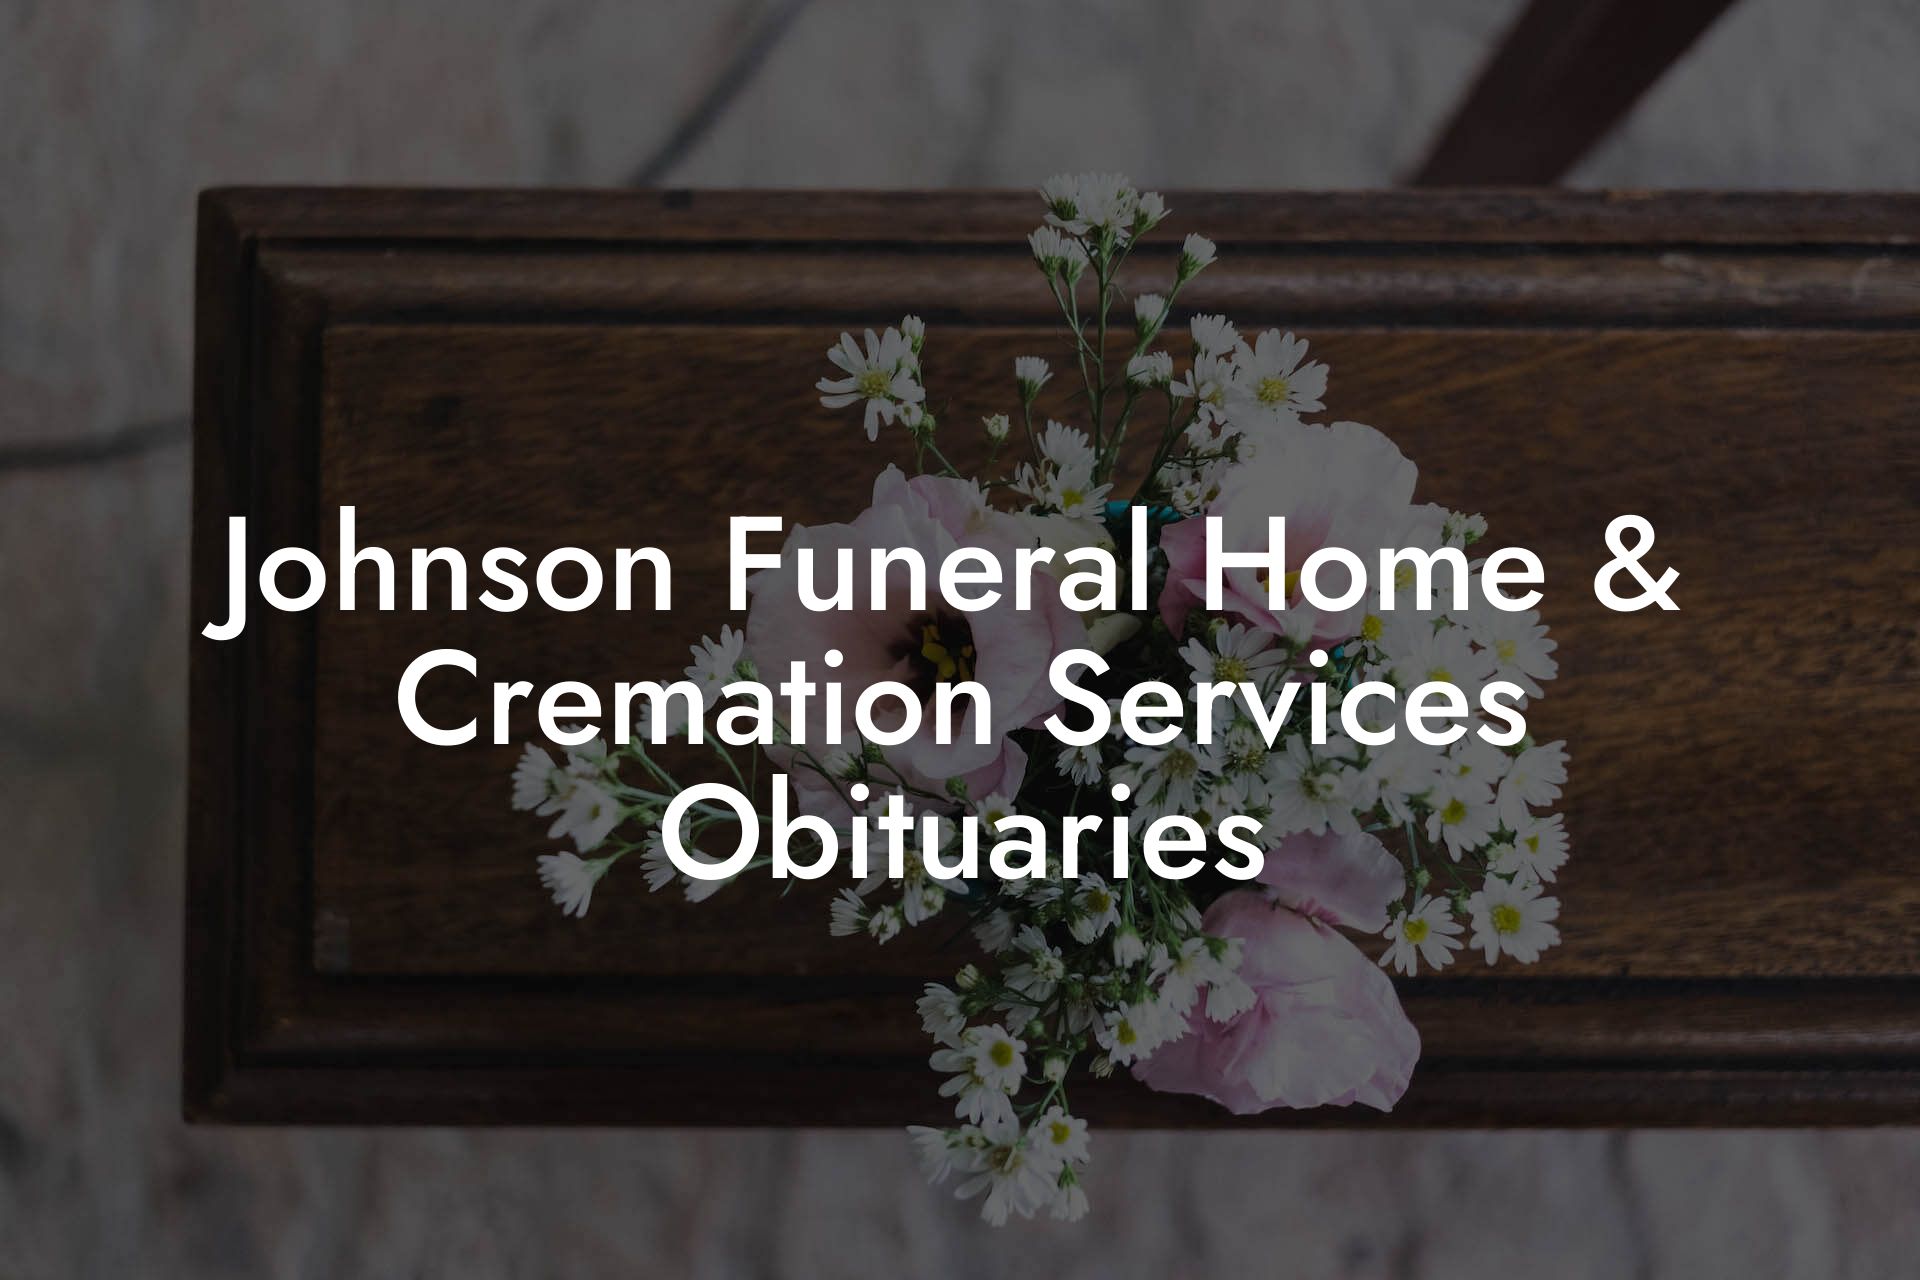 Johnson Funeral Home & Cremation Services Obituaries